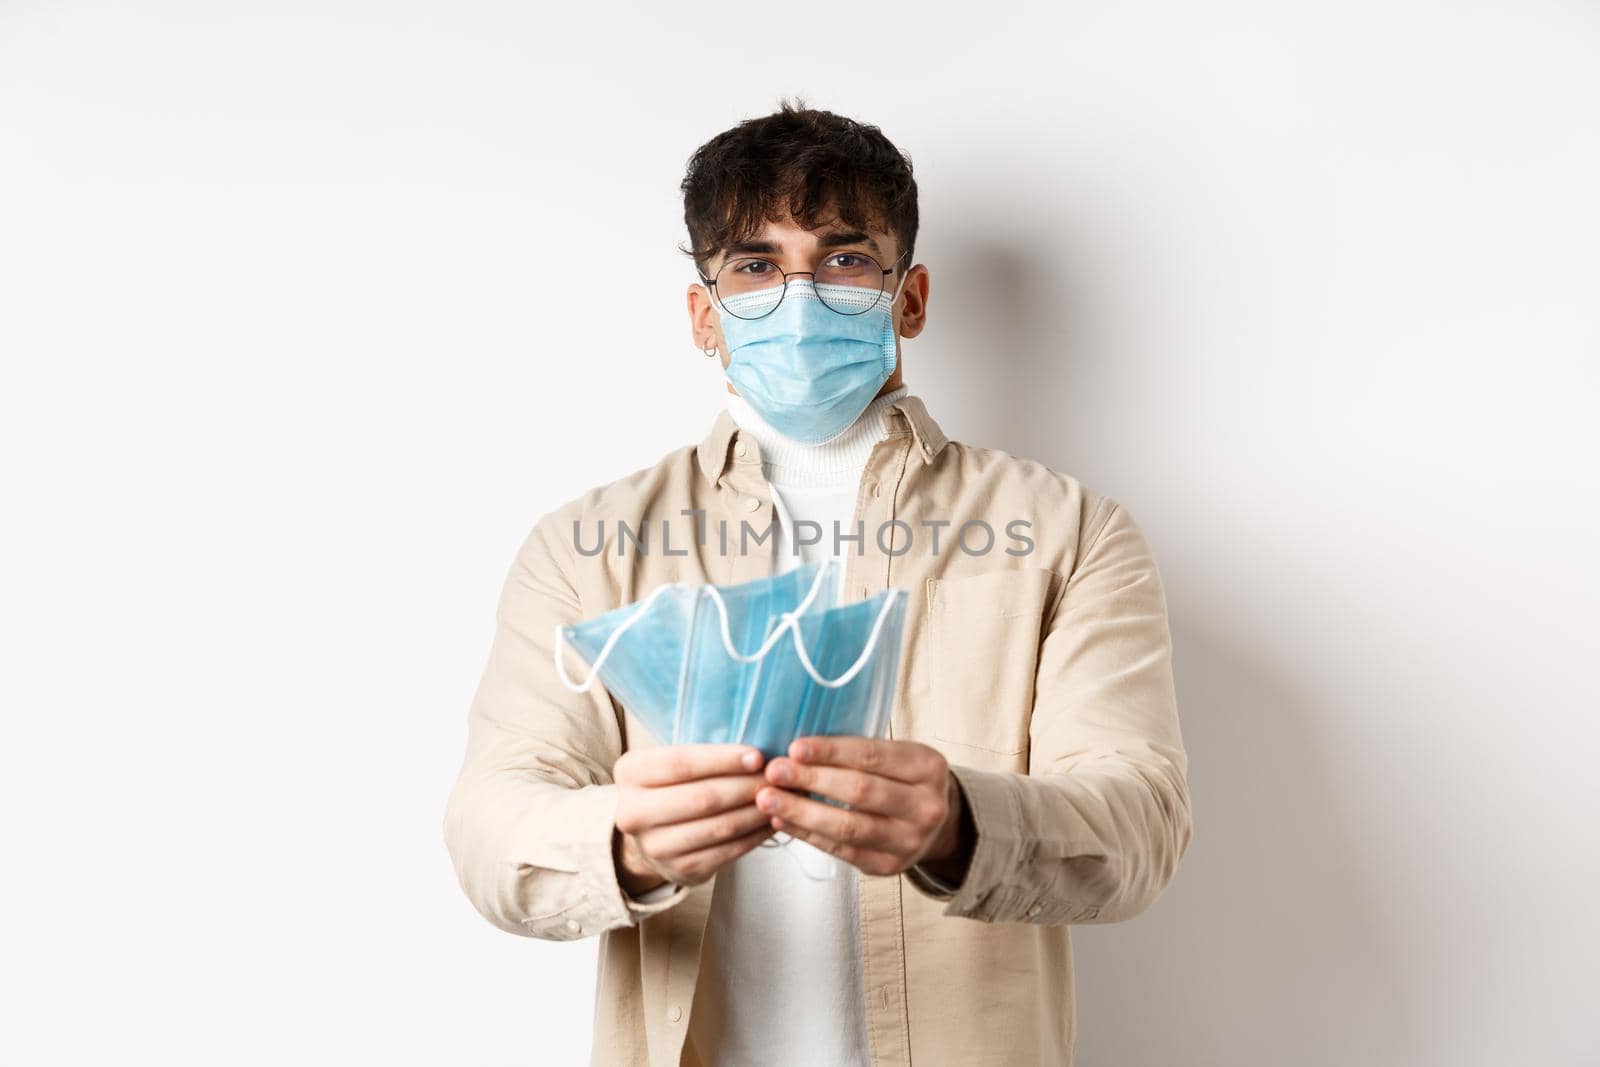 Health, covid and quarantine concept. Image of young guy handing out medical masks for preventive measures, helping during pandemic, standing on white background.